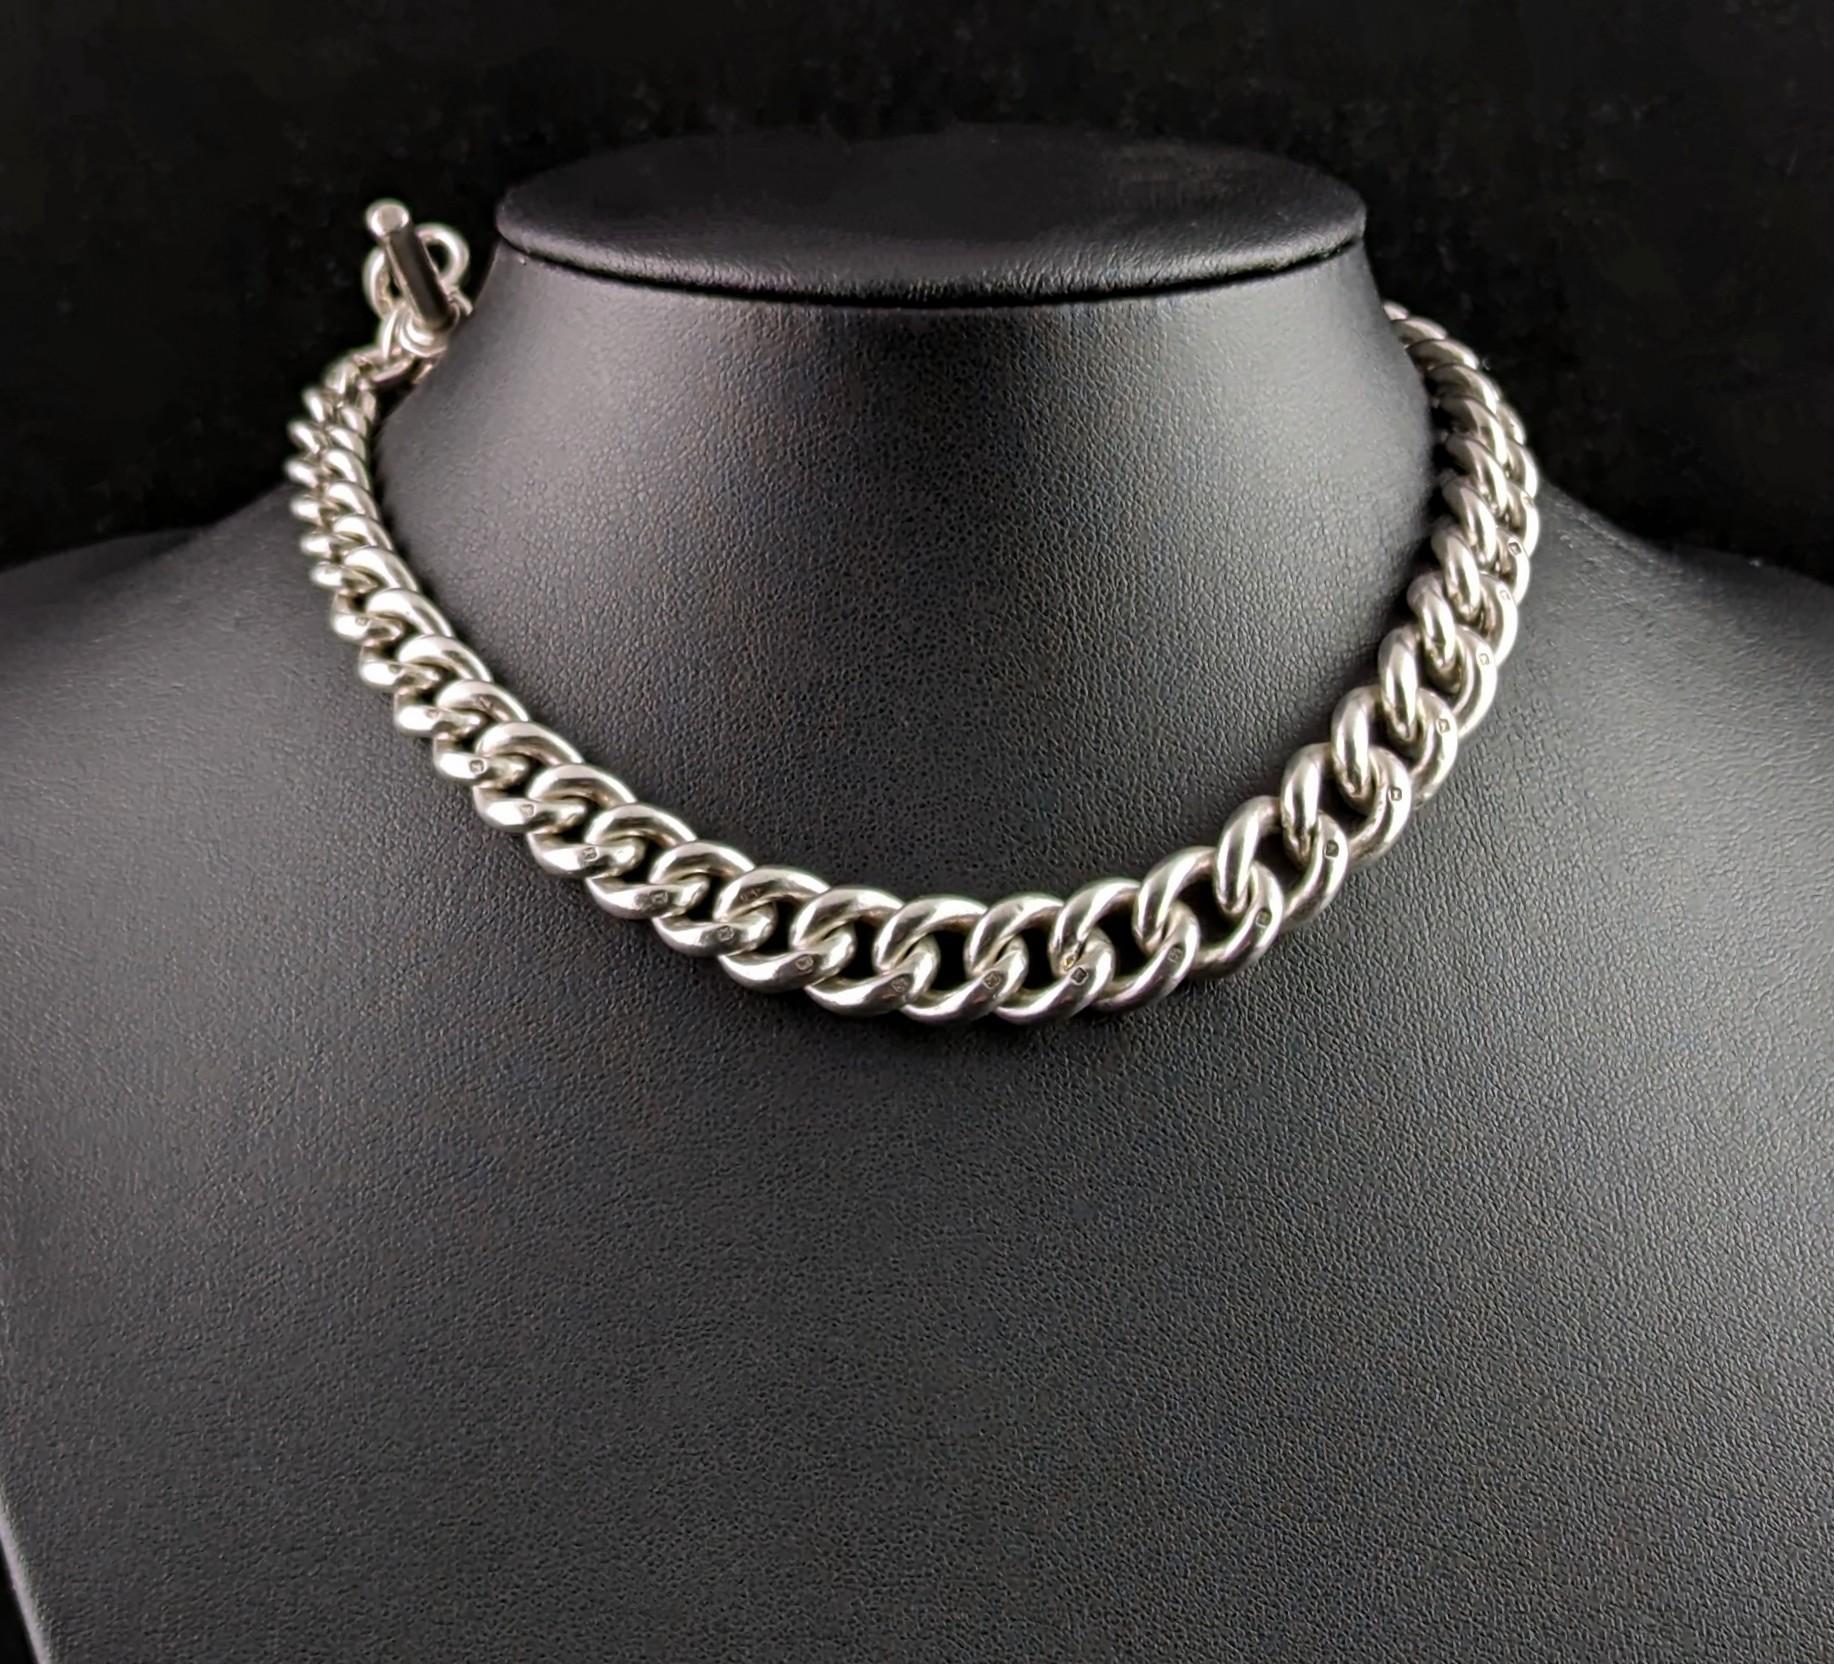 You can't help but fall in love with this handsome antique Albert chain.

It is a sterling silver chain with a chunky and heavy graduating curb link with a base metal dog clip fastener to one end and a T bar and short chain length to the